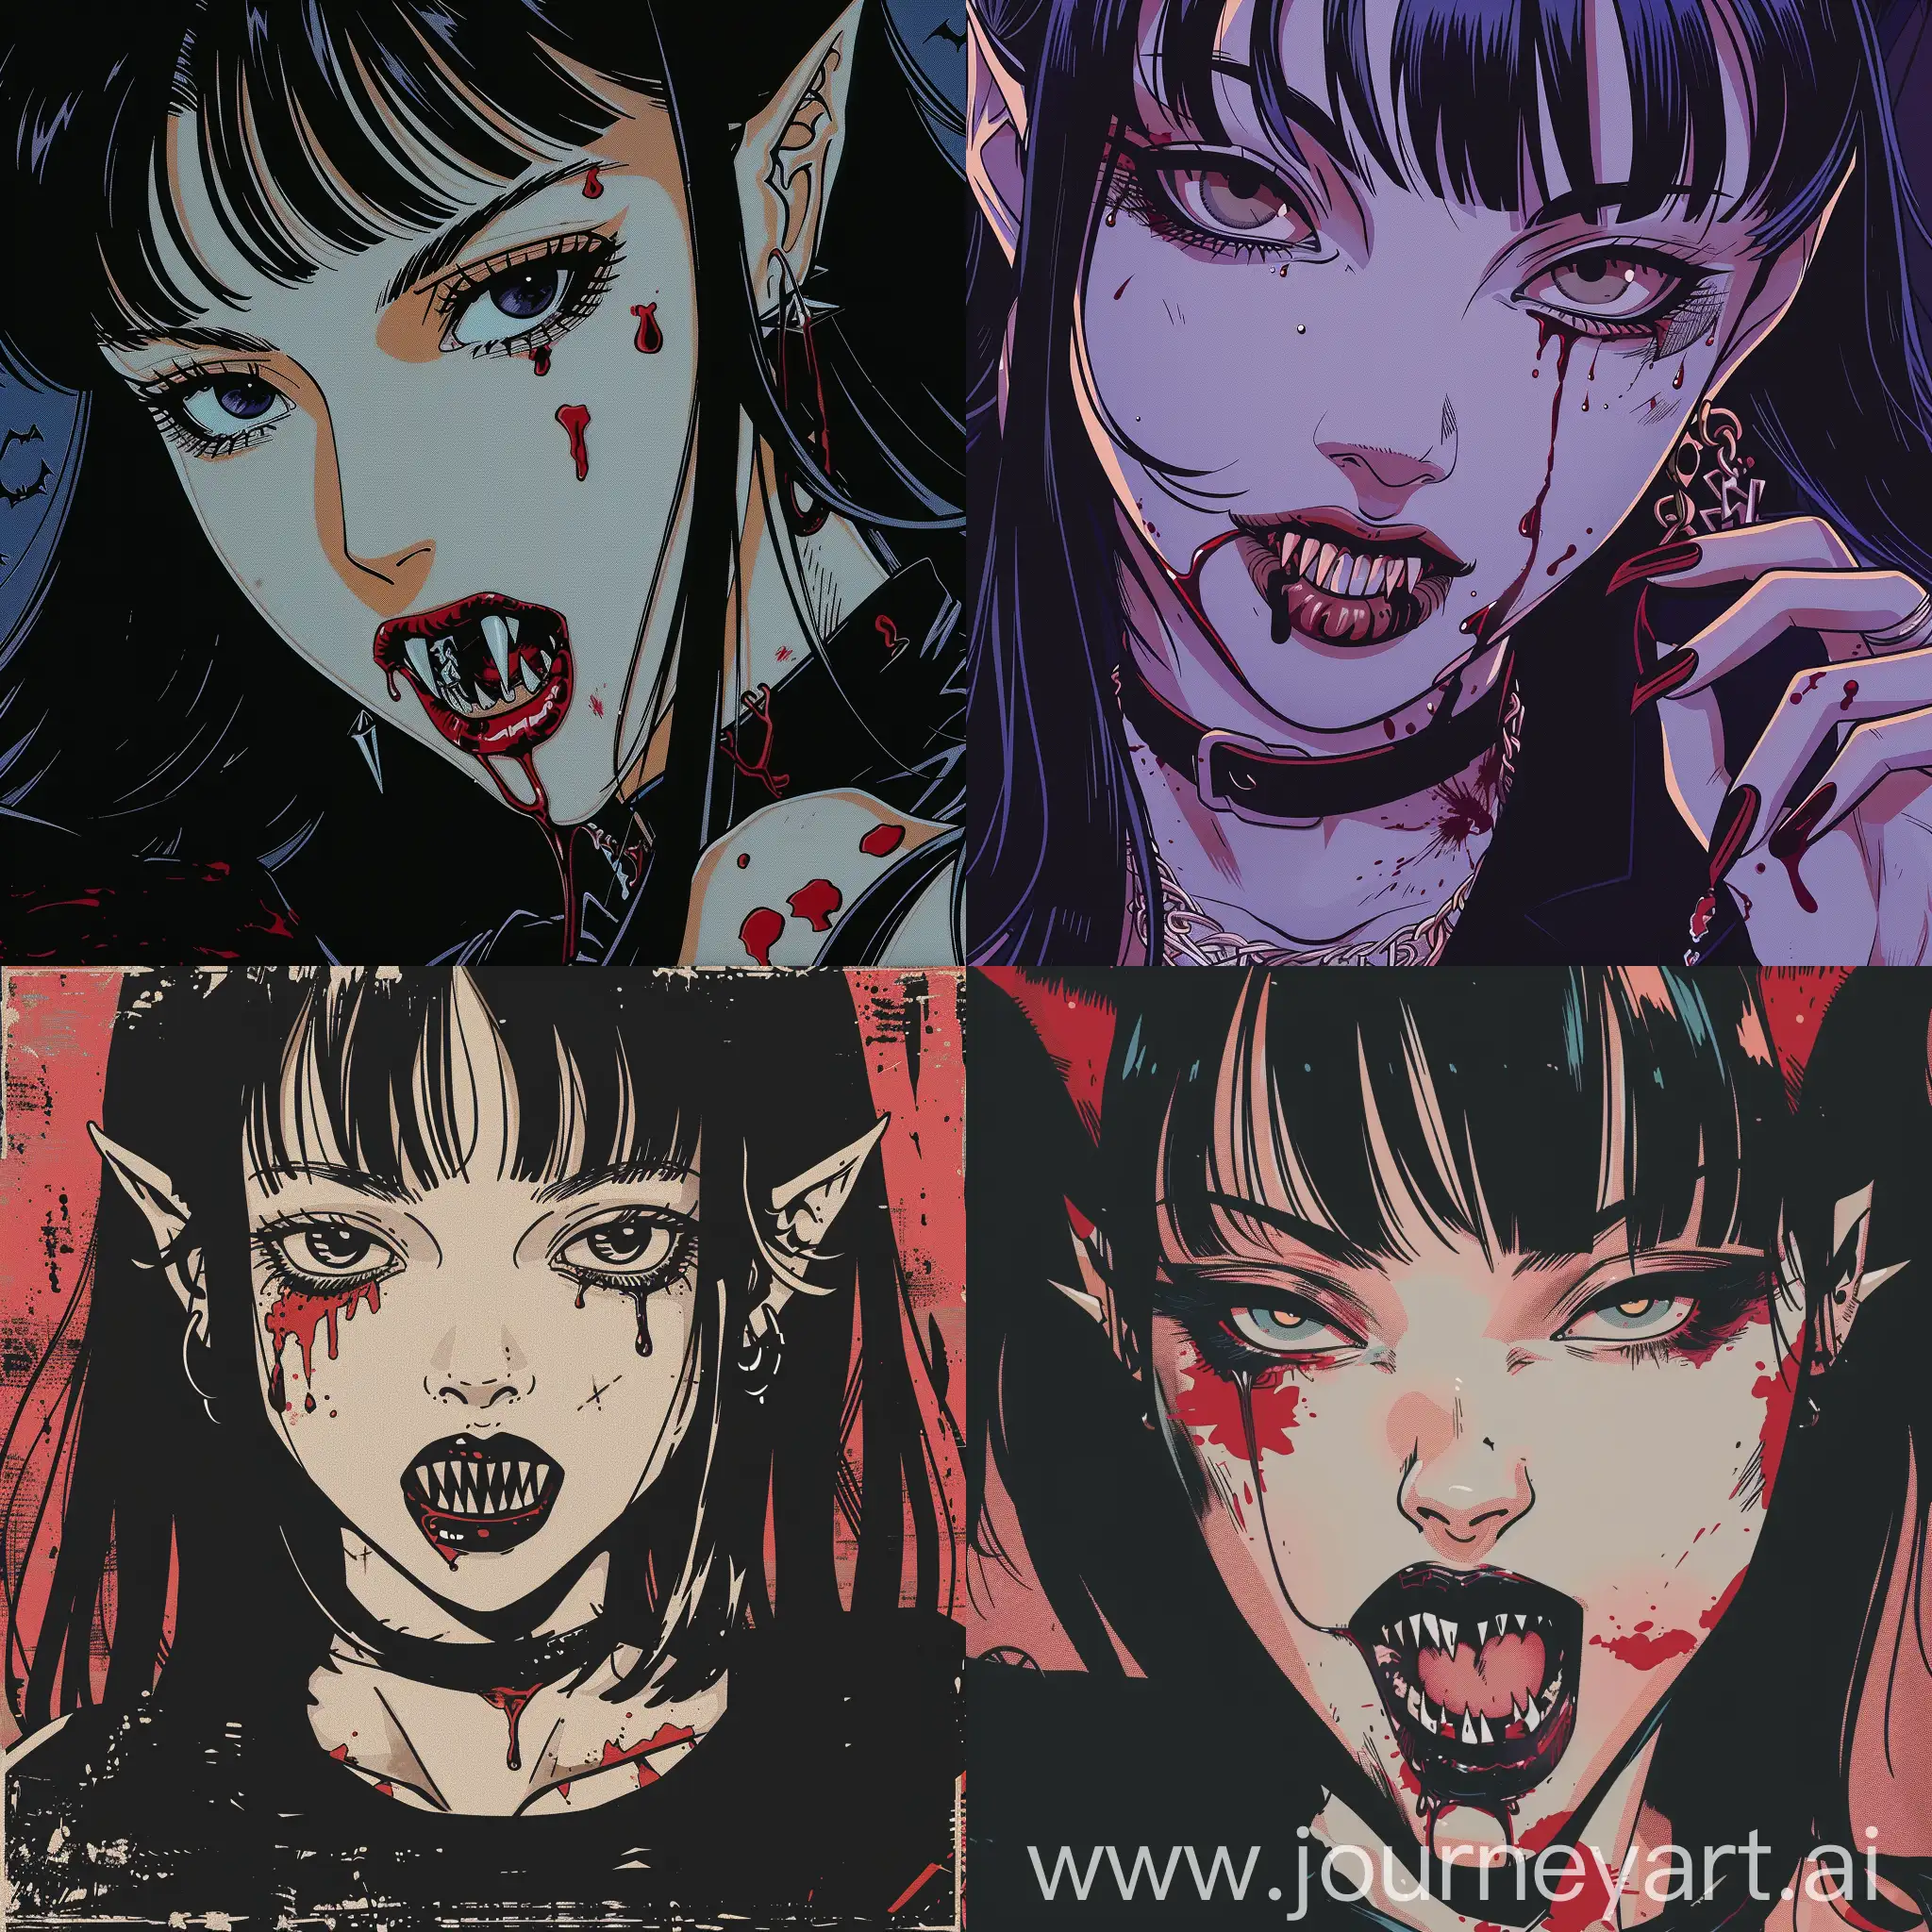 90s-Anime-Comics-Style-Vampire-Girl-with-Fangs-and-Bloodstains